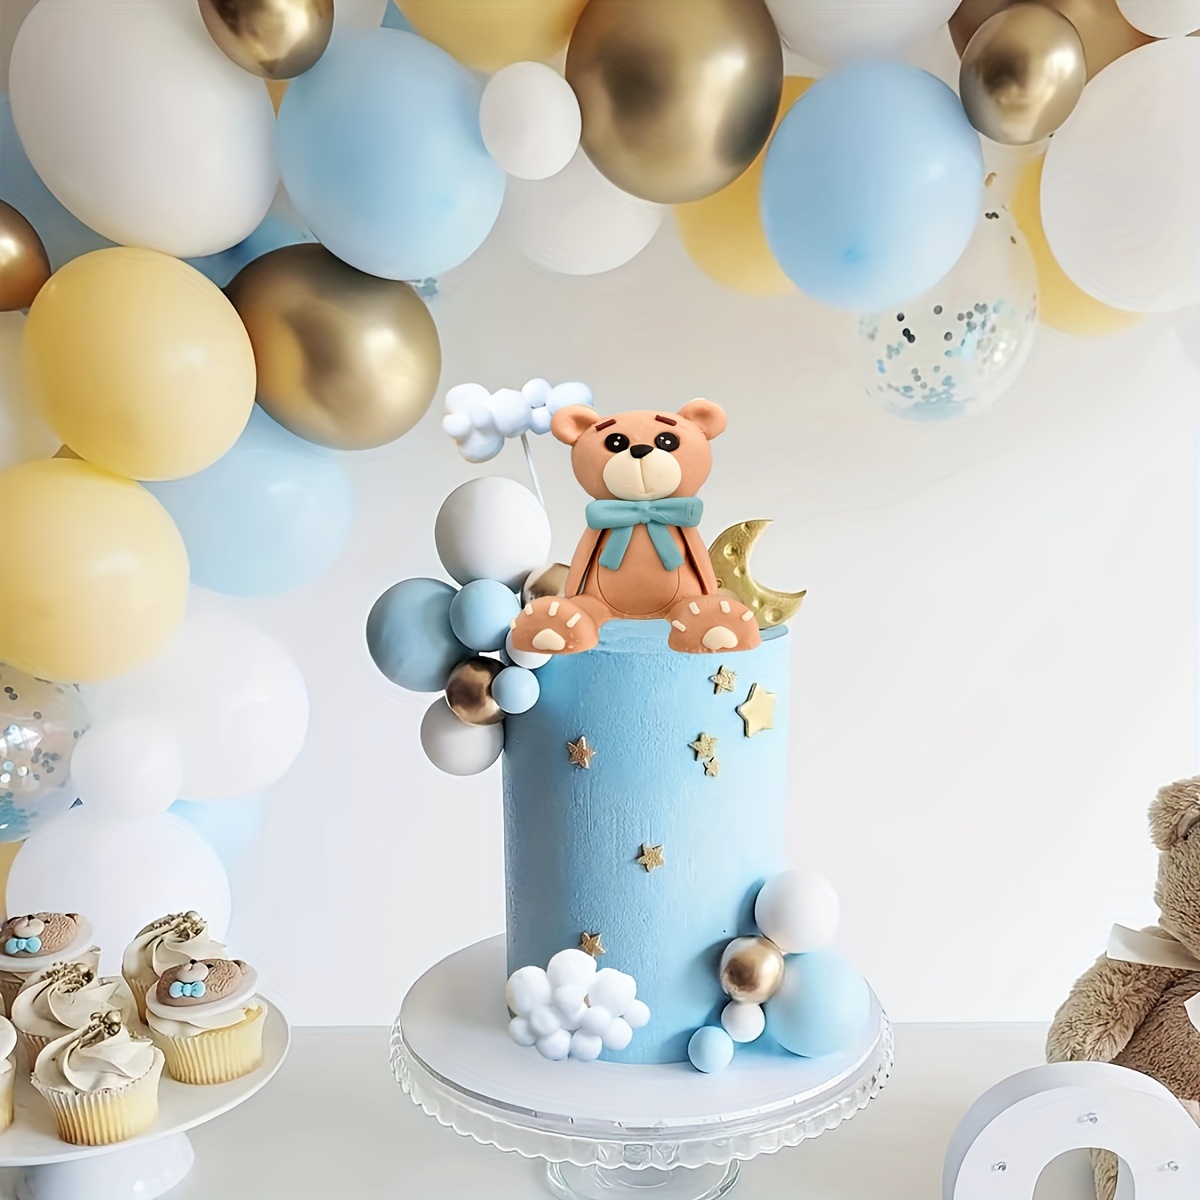 

38pcs, Bear Cake Toppers Bear Balls Cake Decorations With Stars Clouds Cake Toppers For Boy Girl Baby Shower Birthday Party Decorations